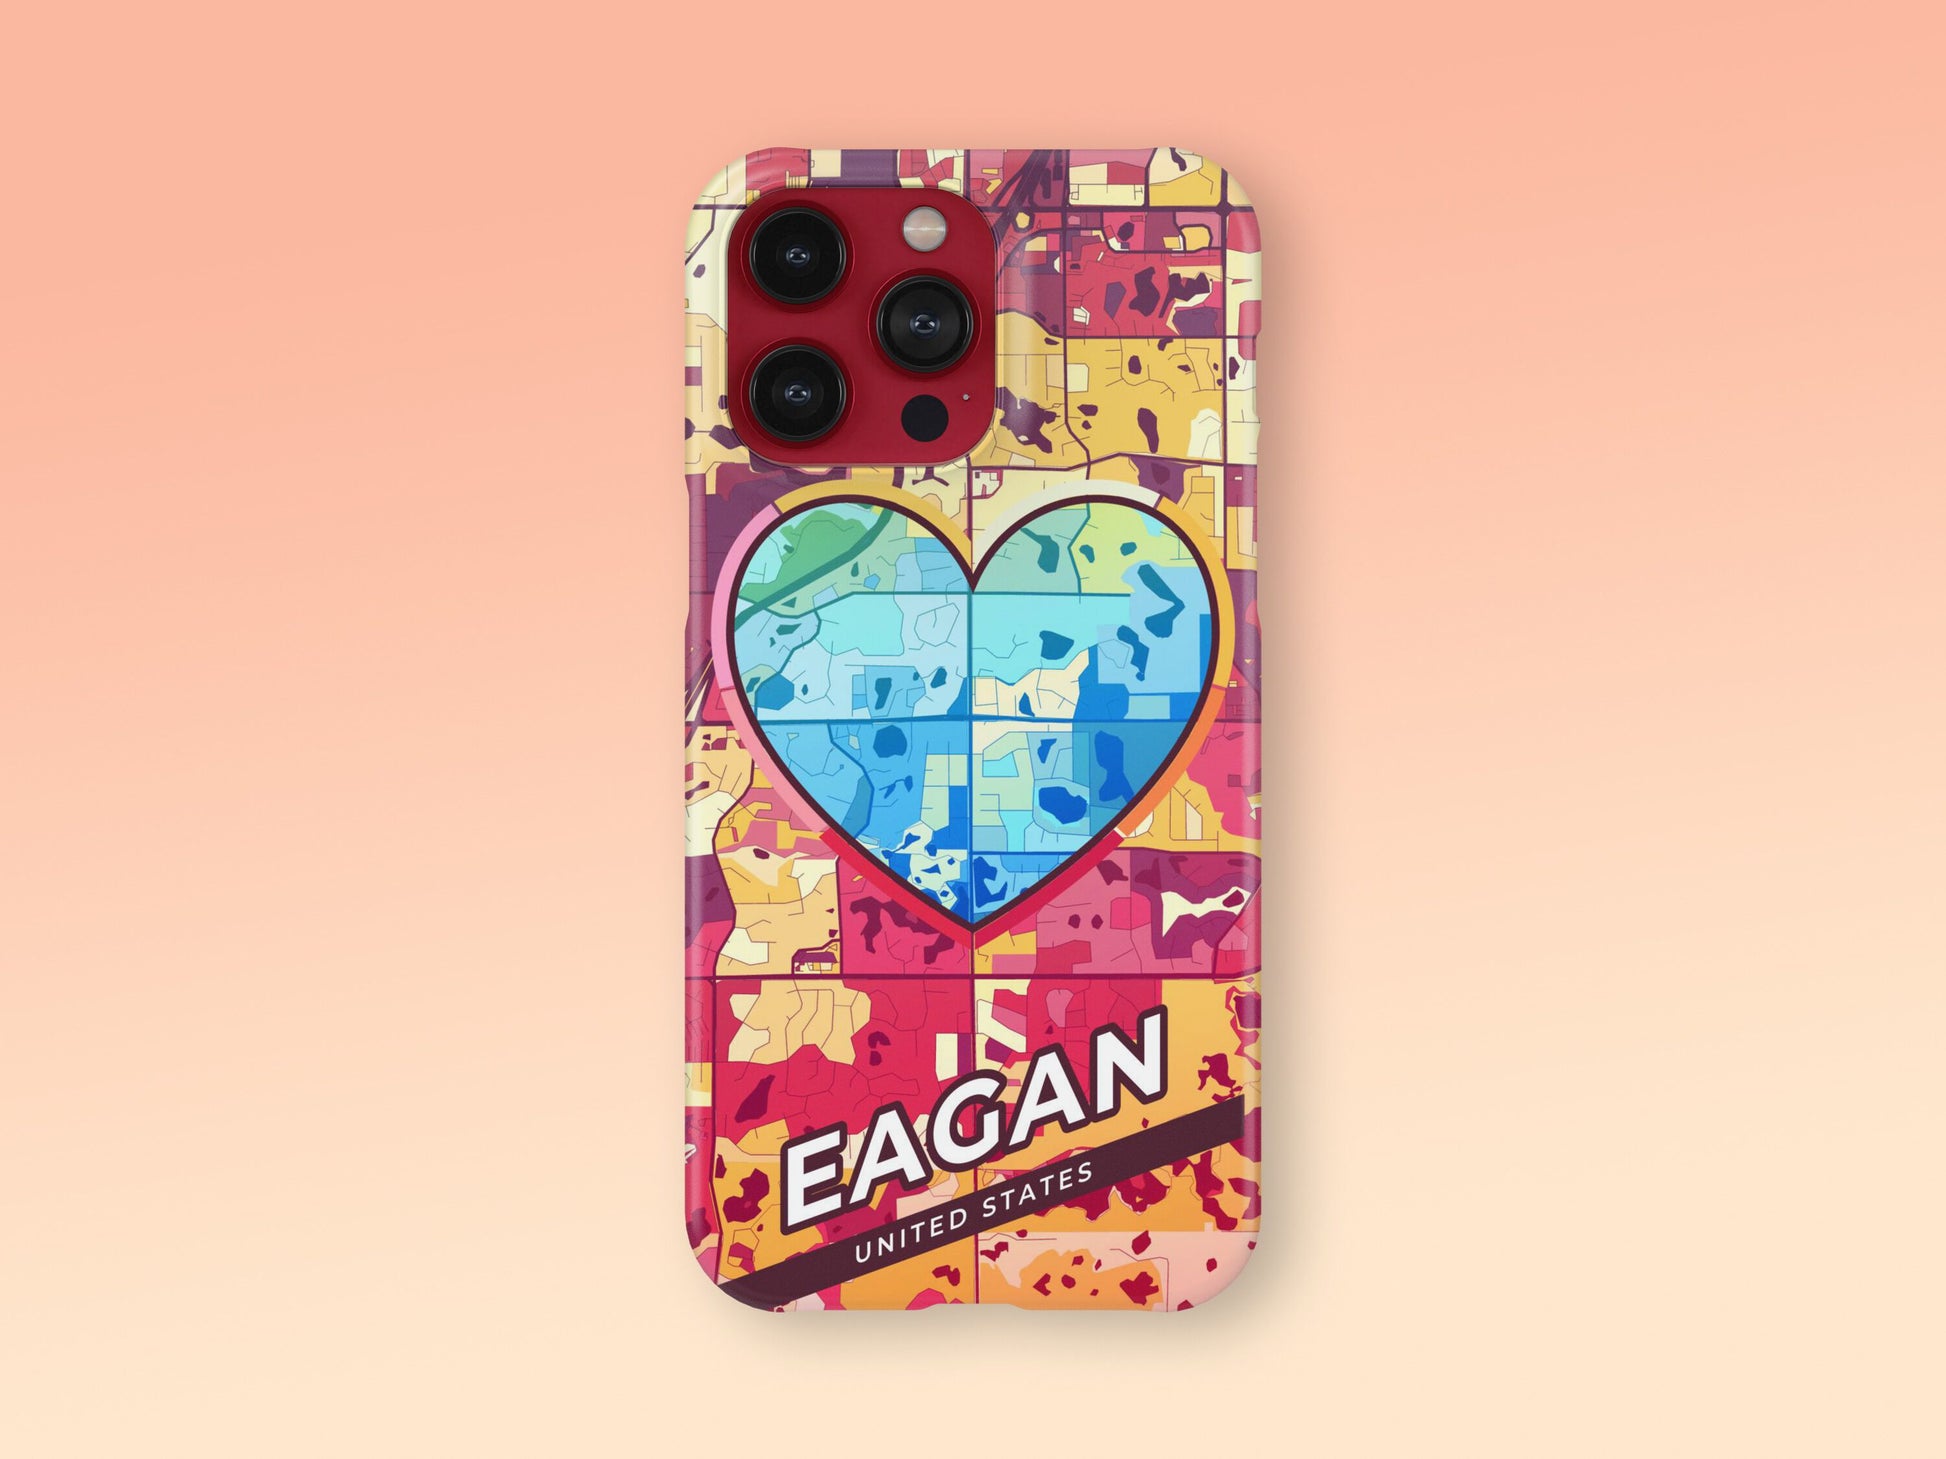 Eagan Minnesota slim phone case with colorful icon. Birthday, wedding or housewarming gift. Couple match cases. 2